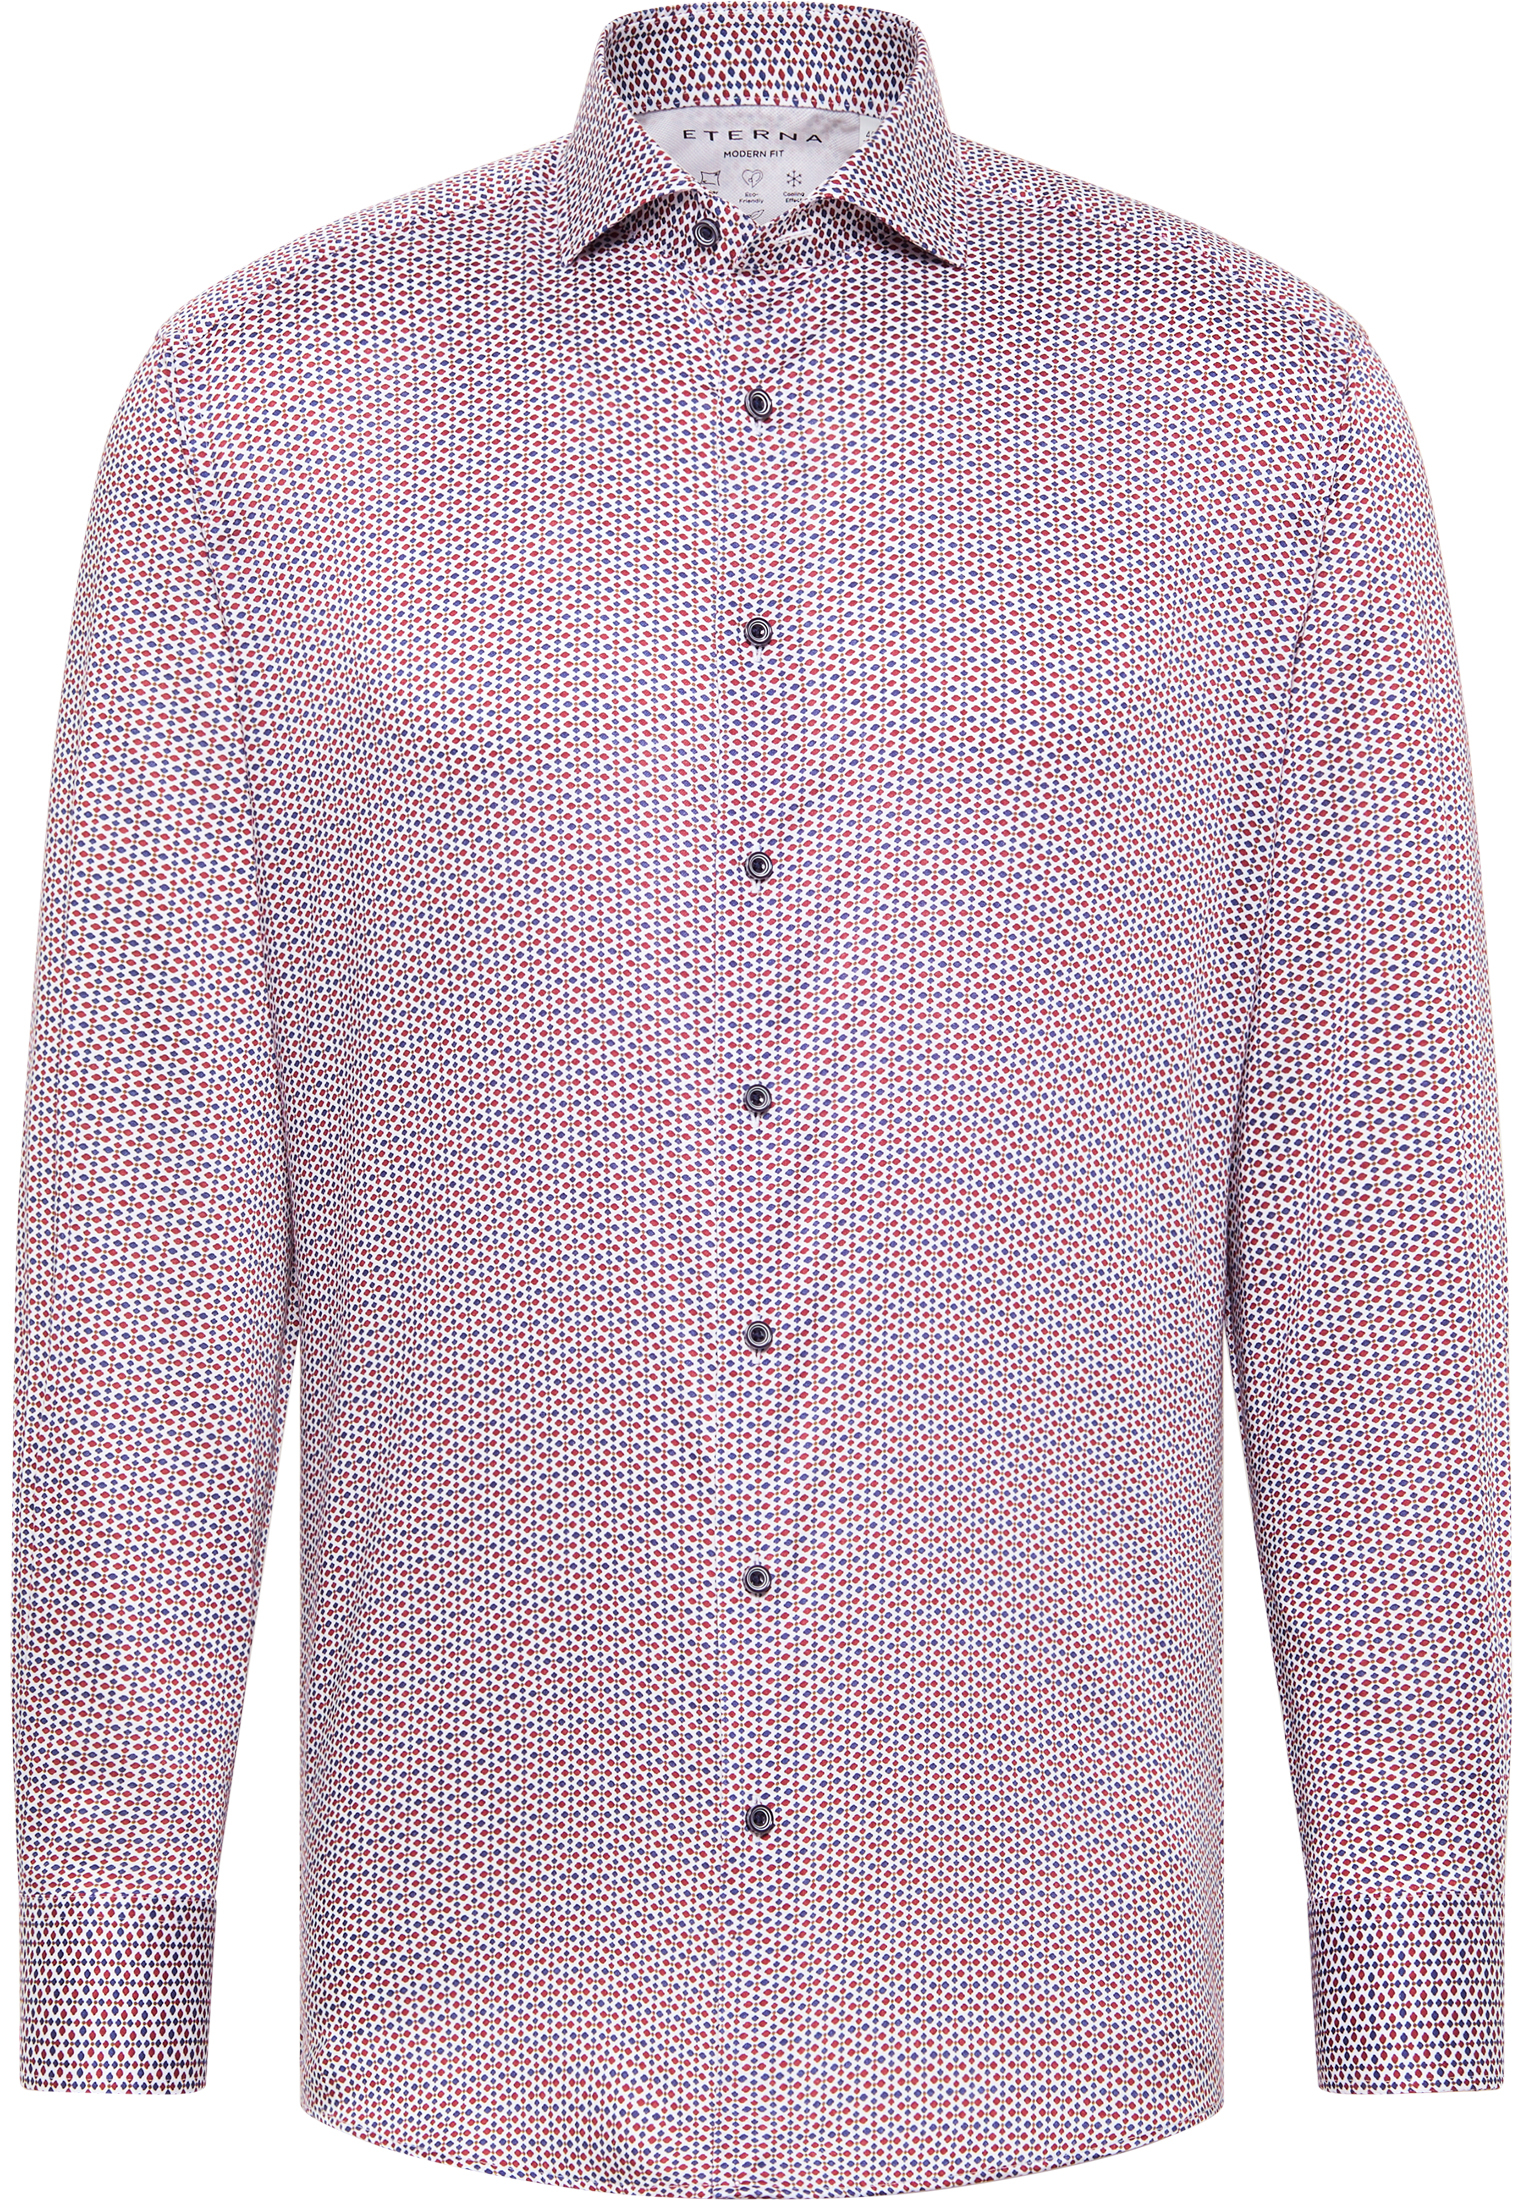 MODERN FIT Performance Shirt in red printed